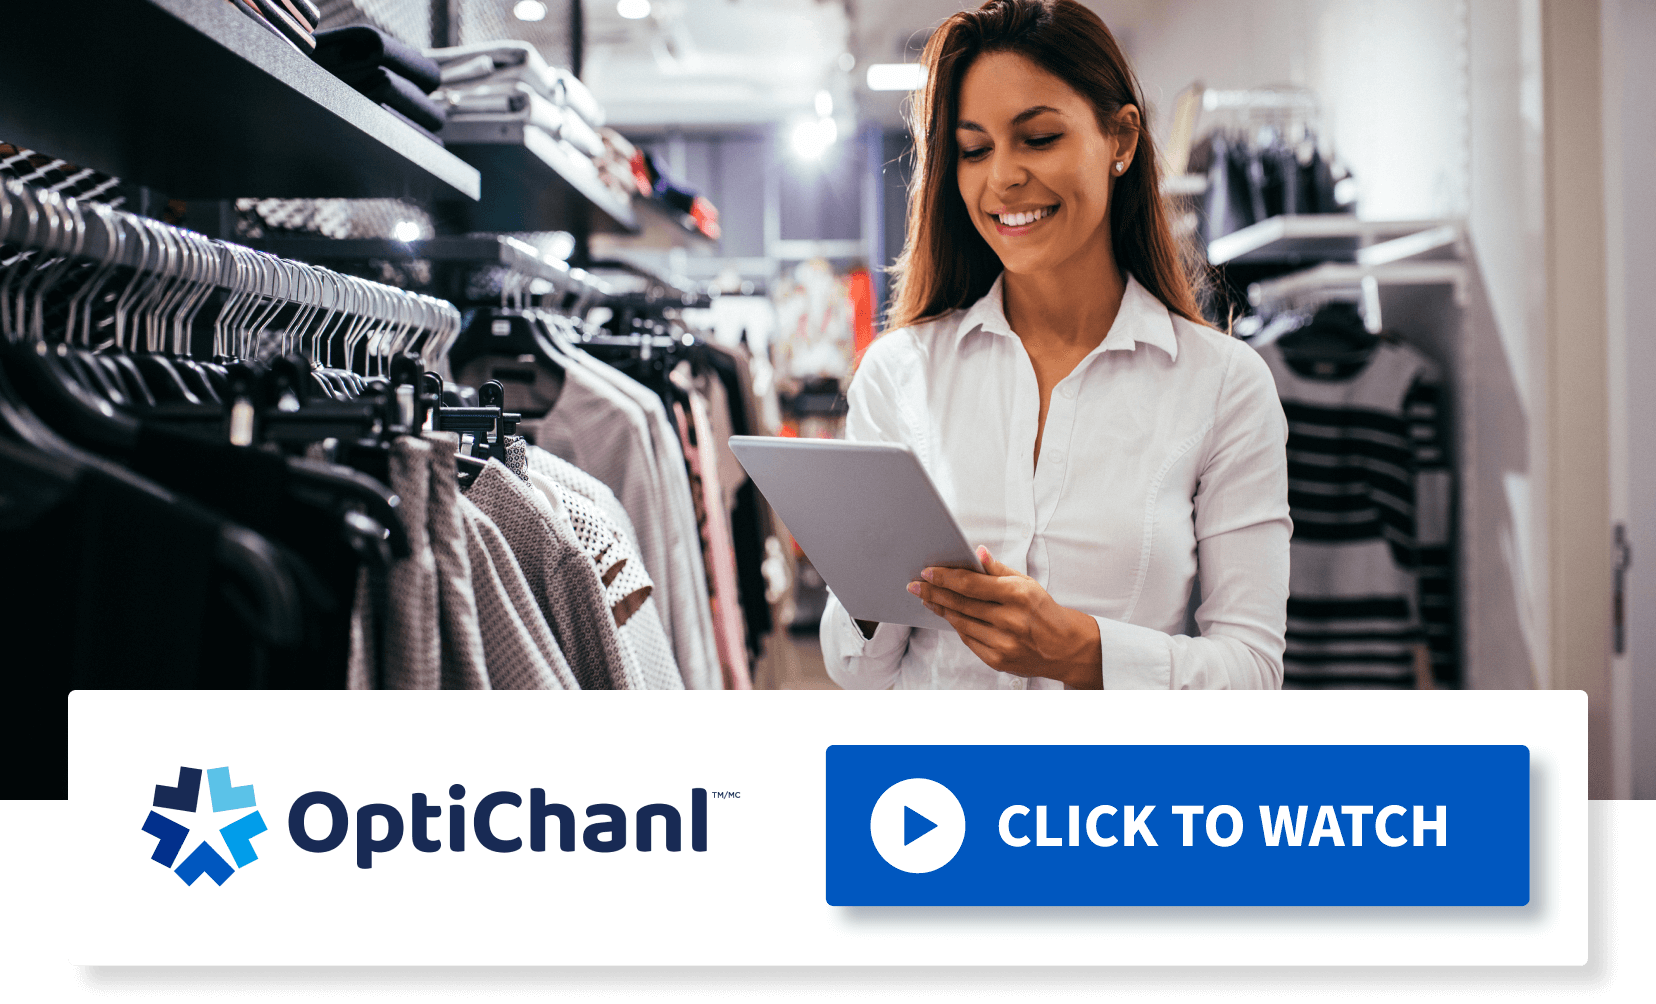 OptiChanl. Click to watch. Retail worker checking inventory on a tablet.